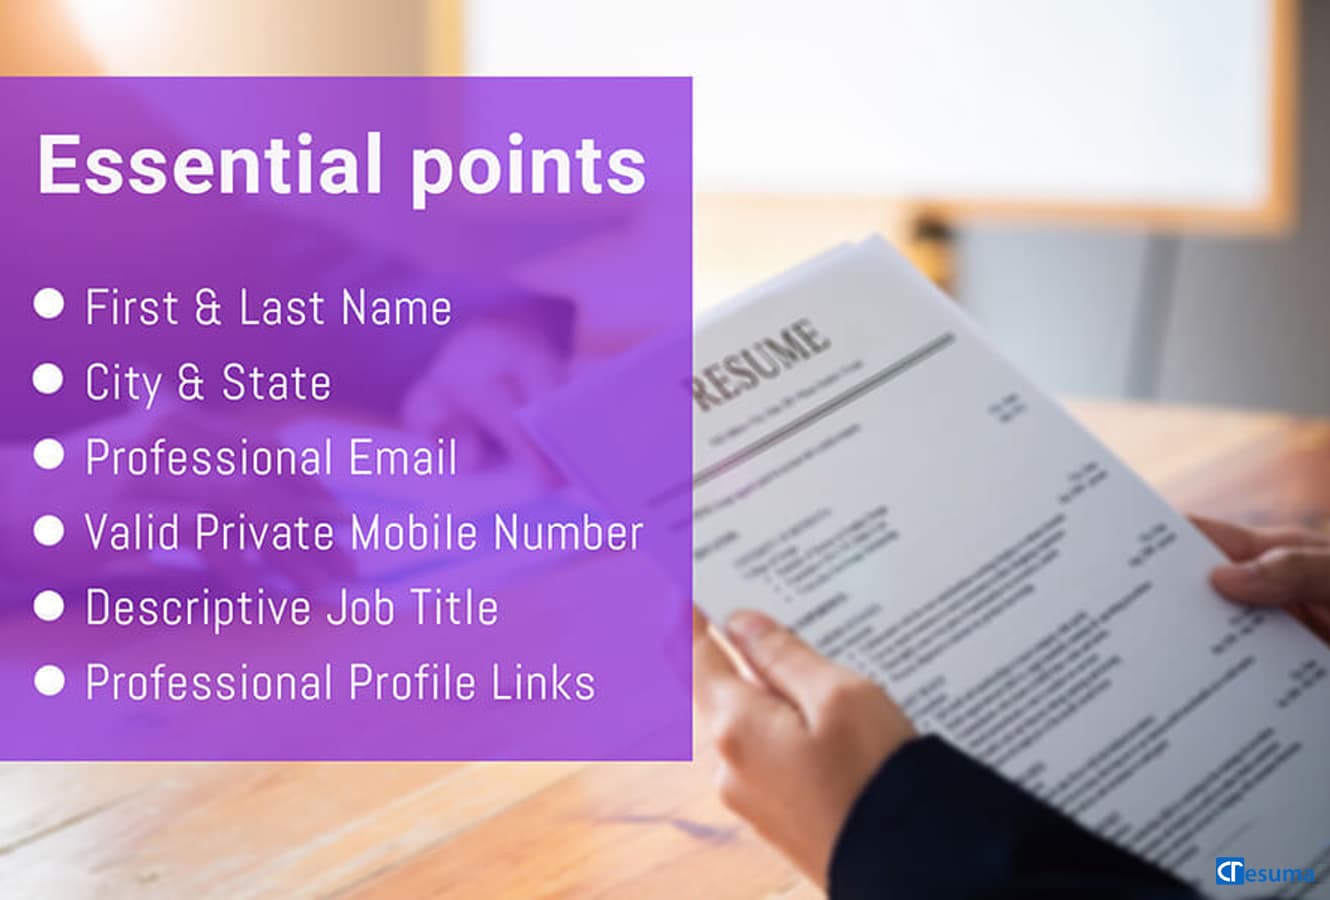  The most essential points for a mud logger resume header